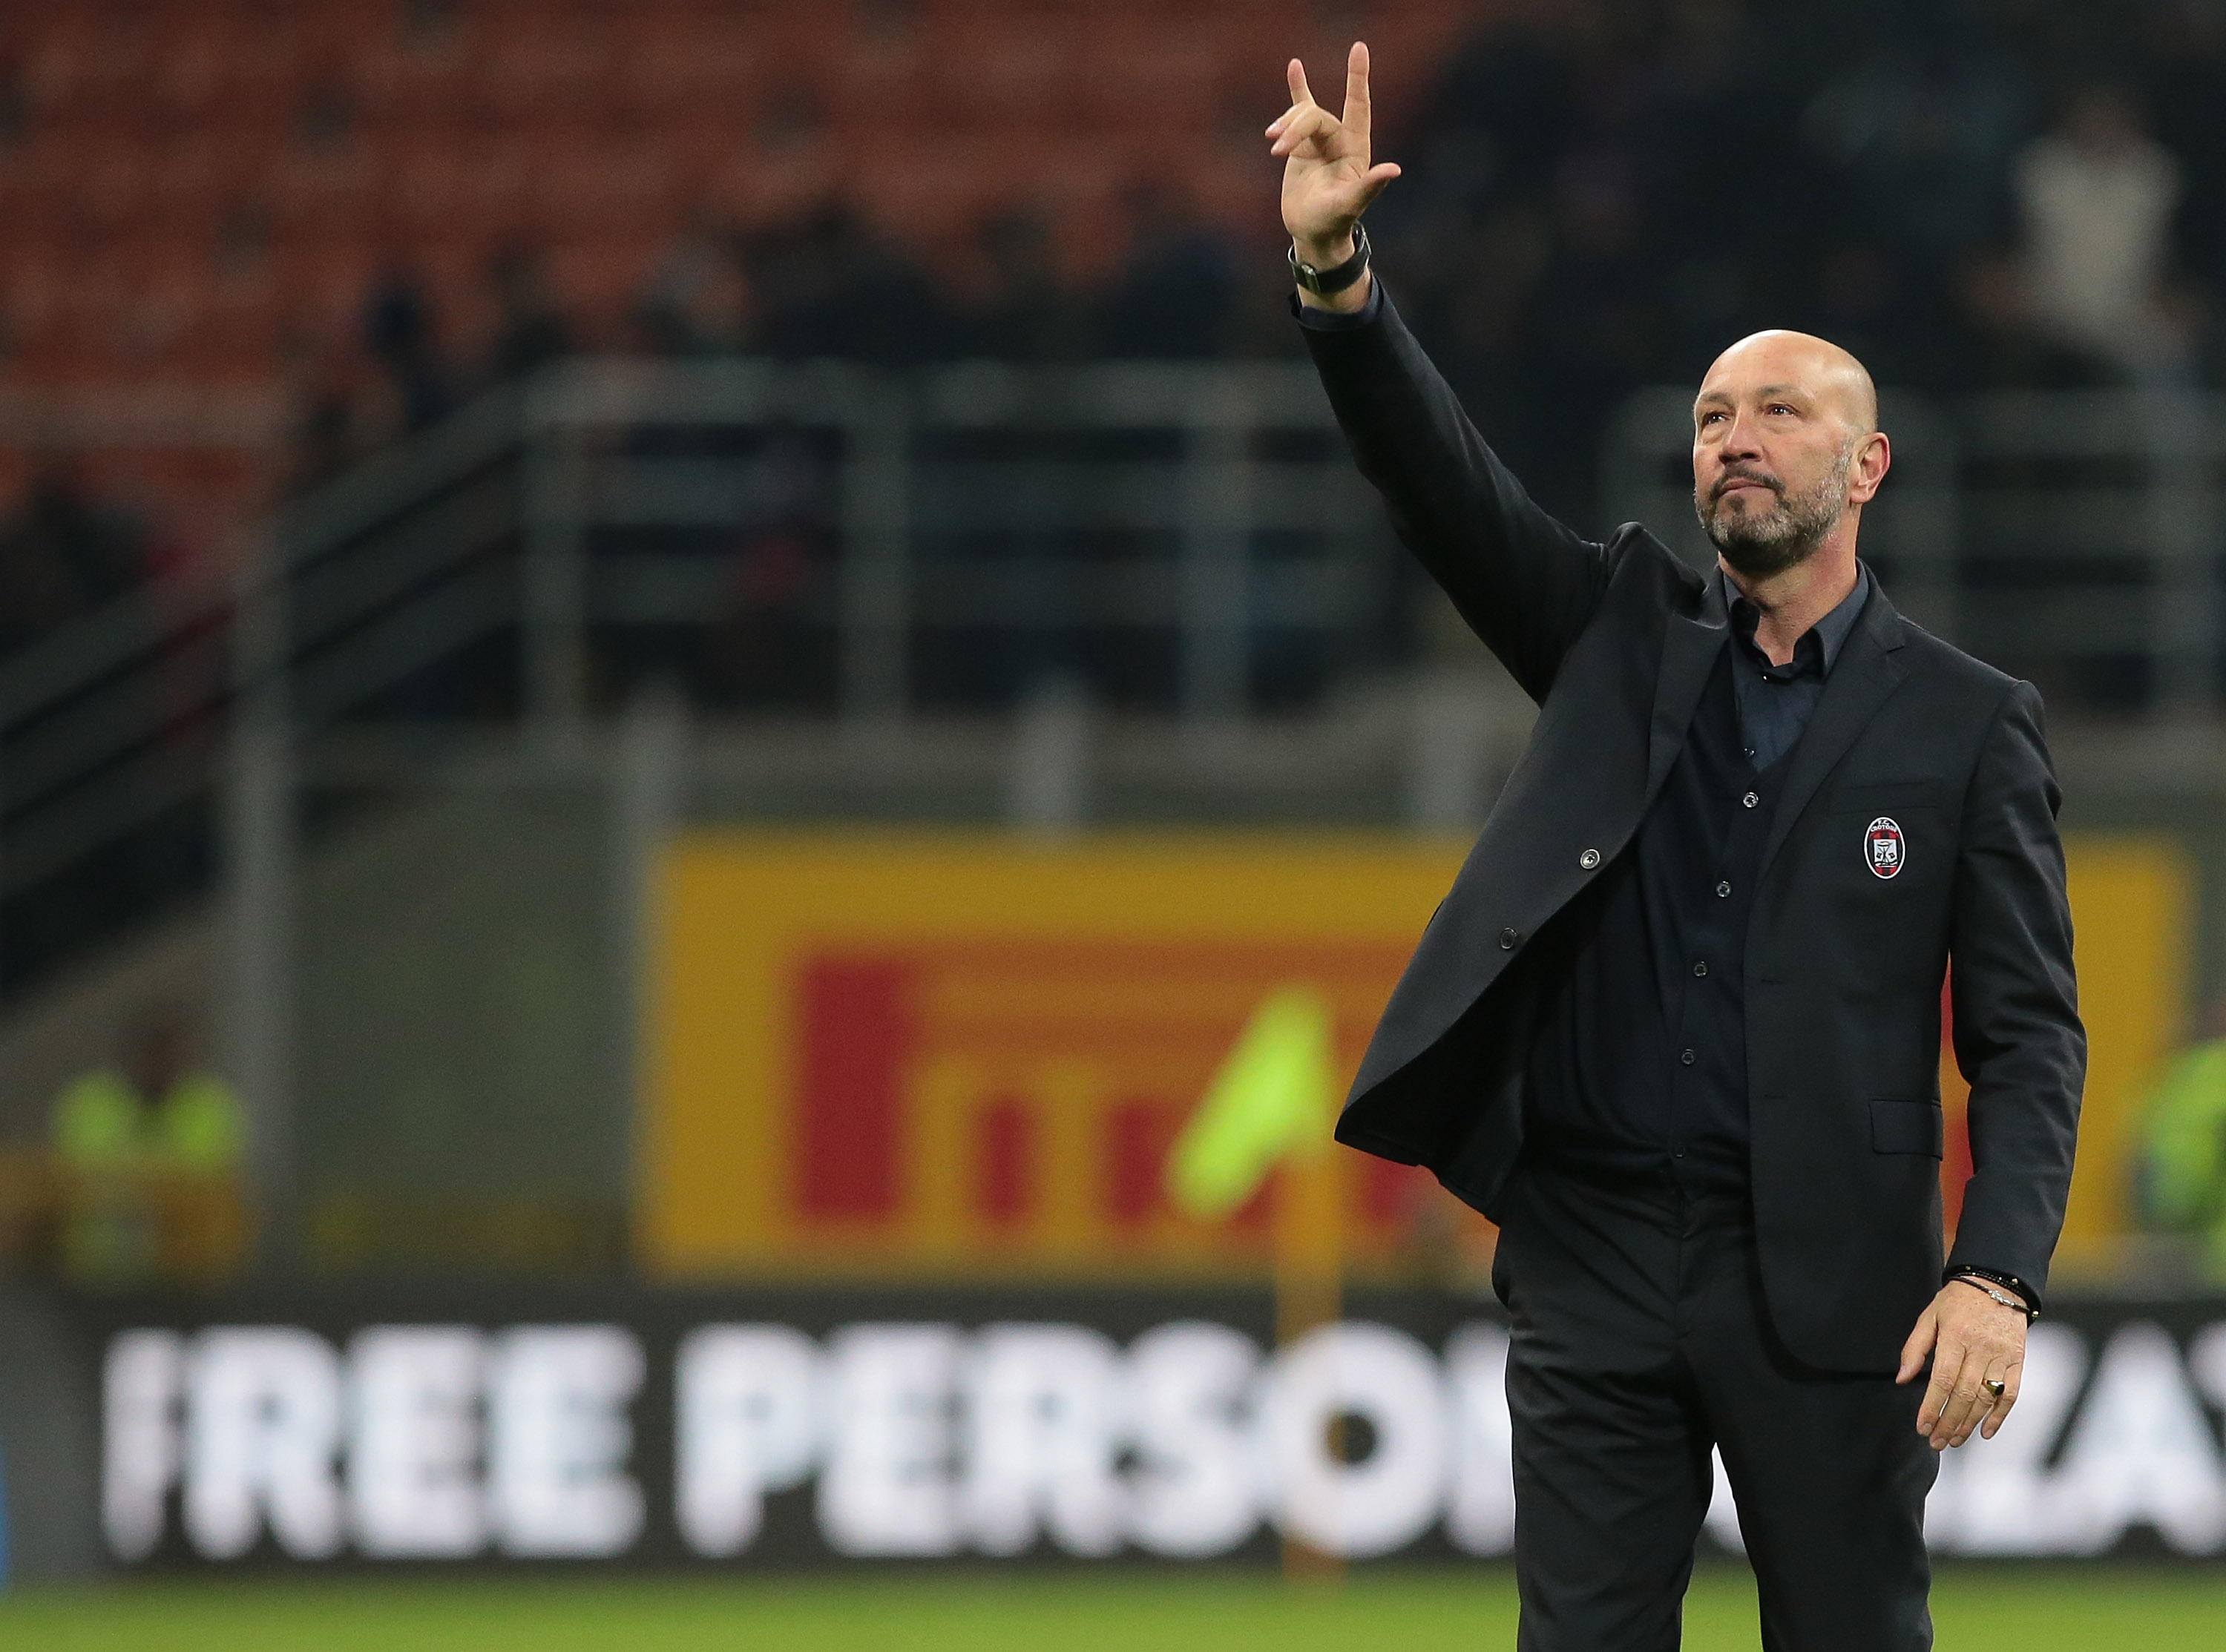 Walter Zenga has embraced the challenge at Crotone.